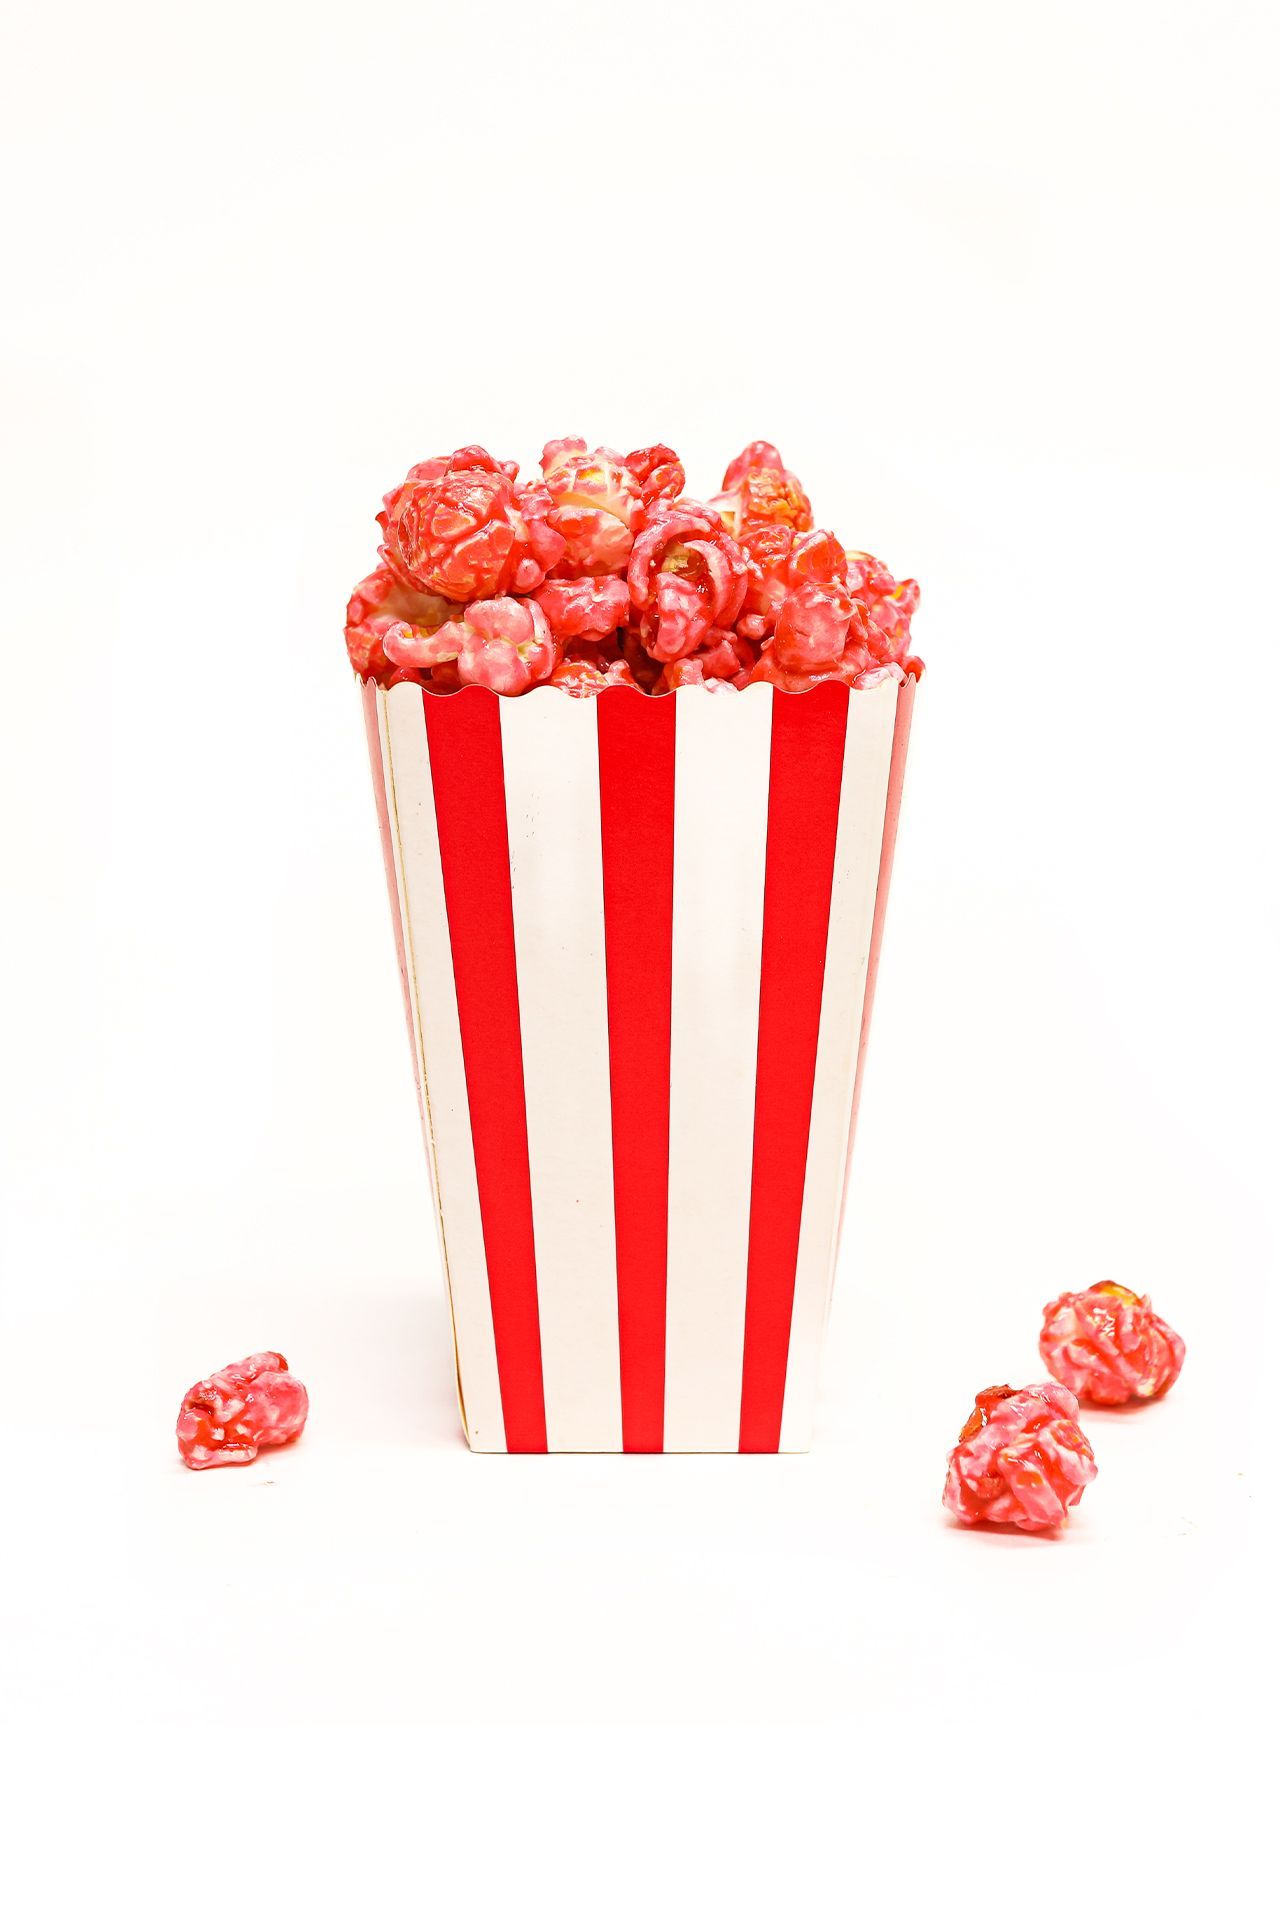 A red and white striped popcorn container with red popcorn spilling out of it. - Popcorn